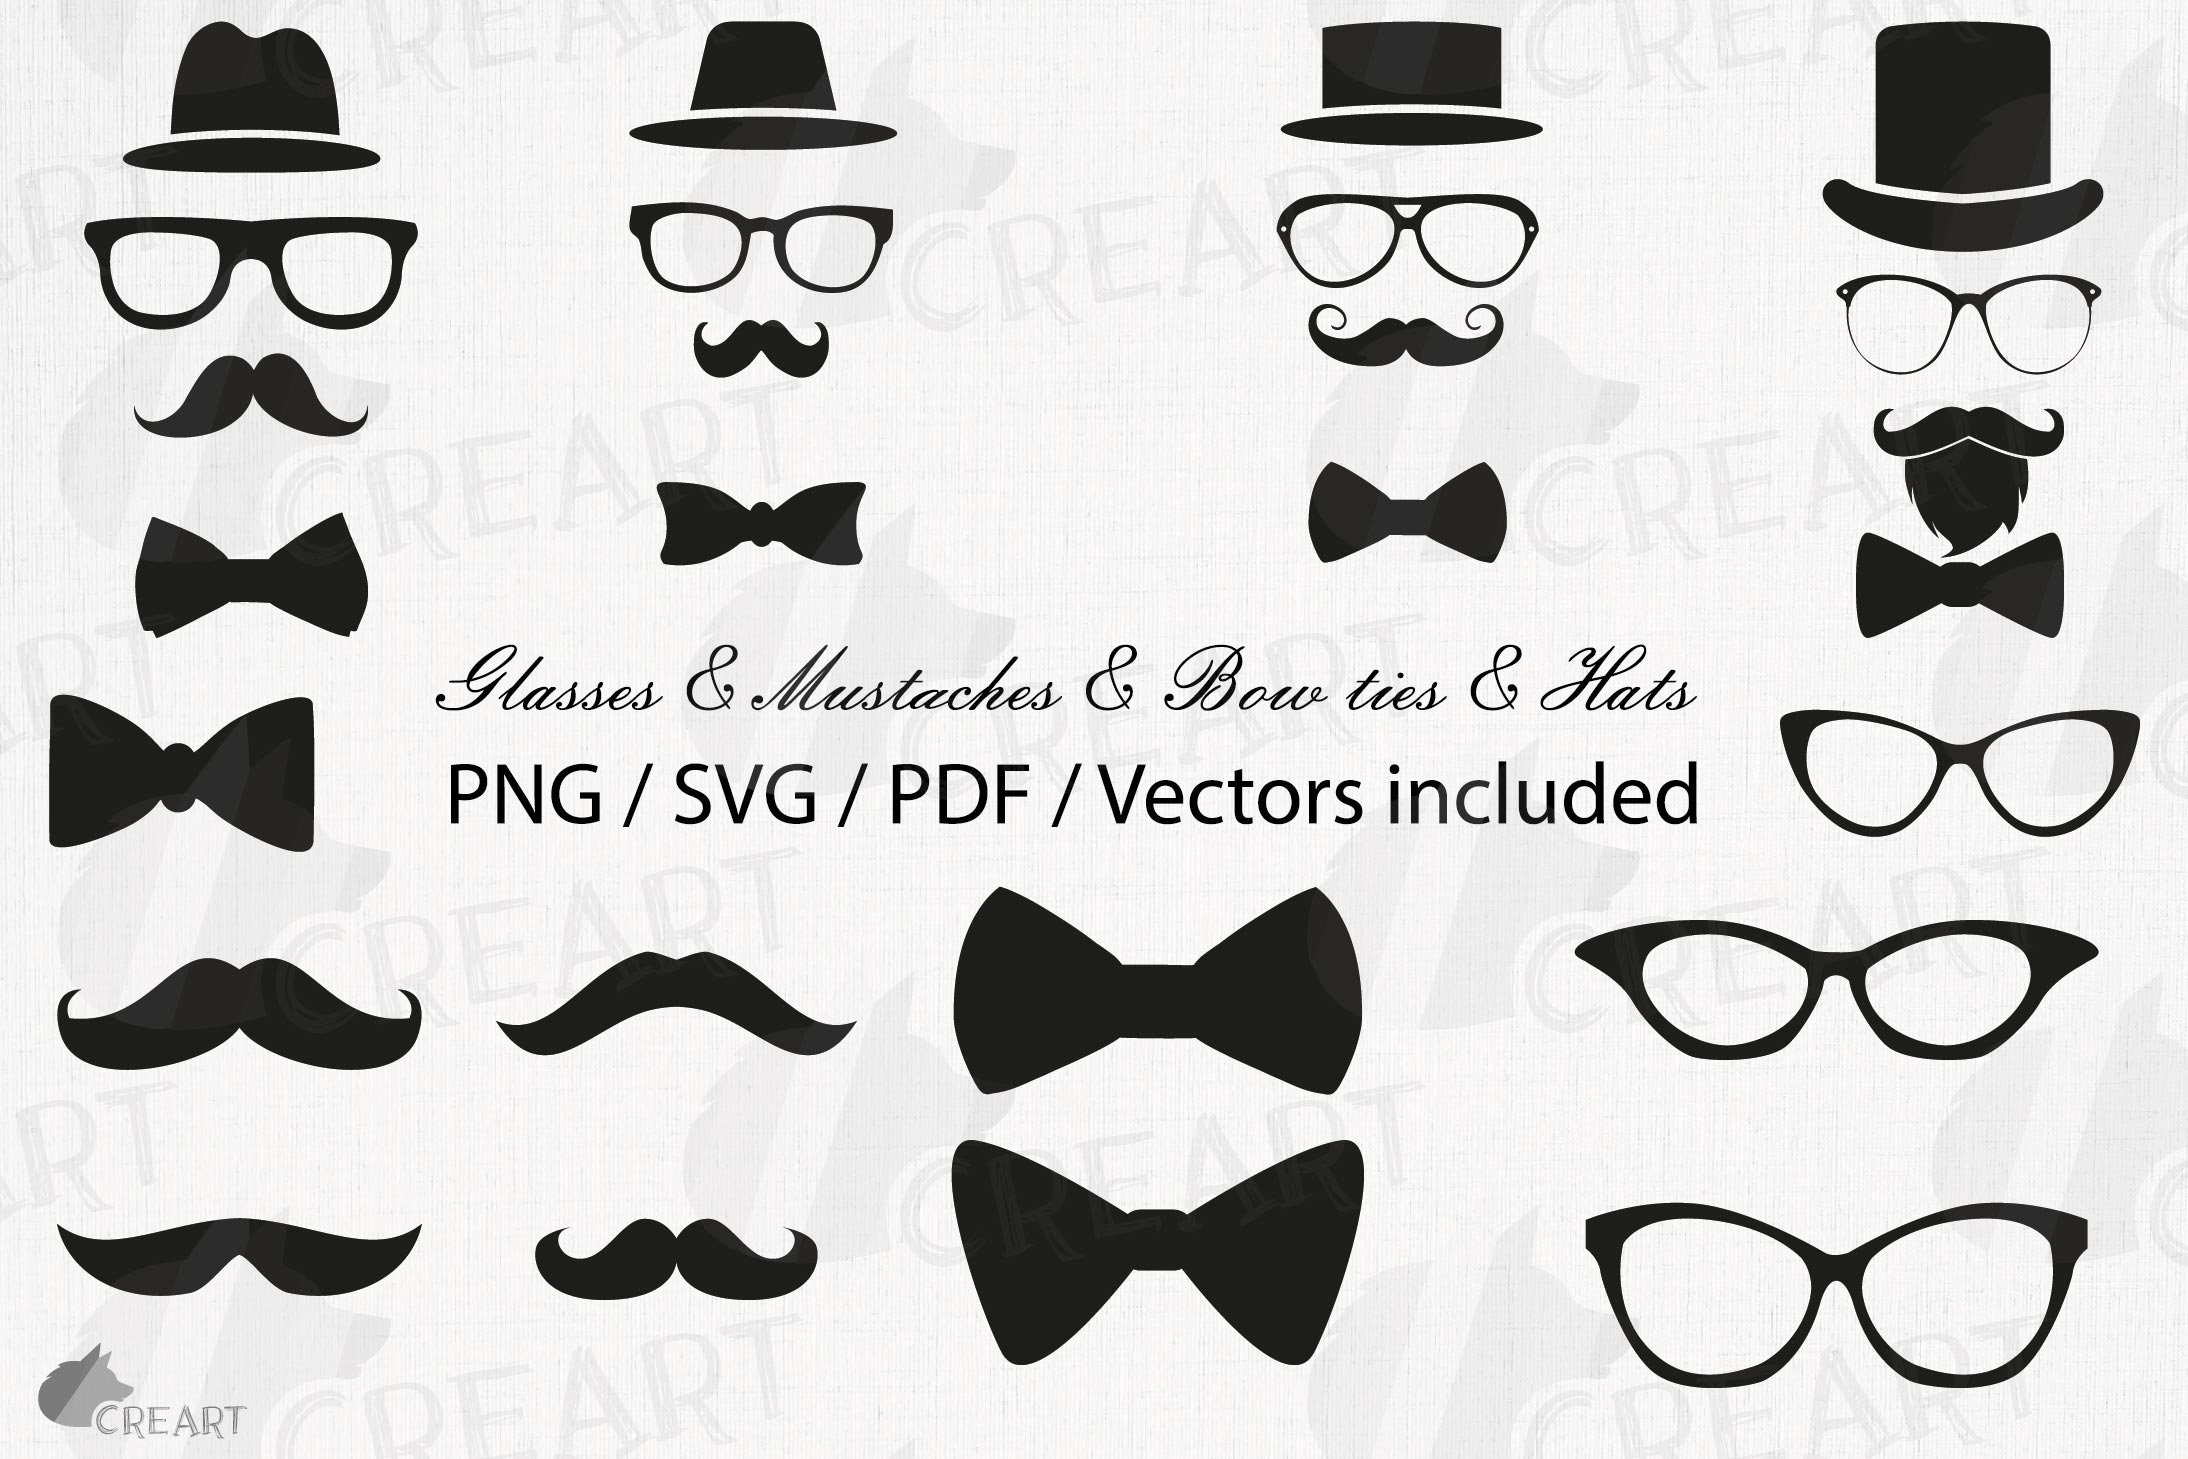 Bow Tie PNG - Blue Bow Tie, Black Bow Tie, Bow Tie Black, Baby Bow Tie, Bow  Tie Silhouette, Bow Tie Outline, Plaid Bow Tie, Chevy Bow Tie, Bow Tie  Graphic, Navy